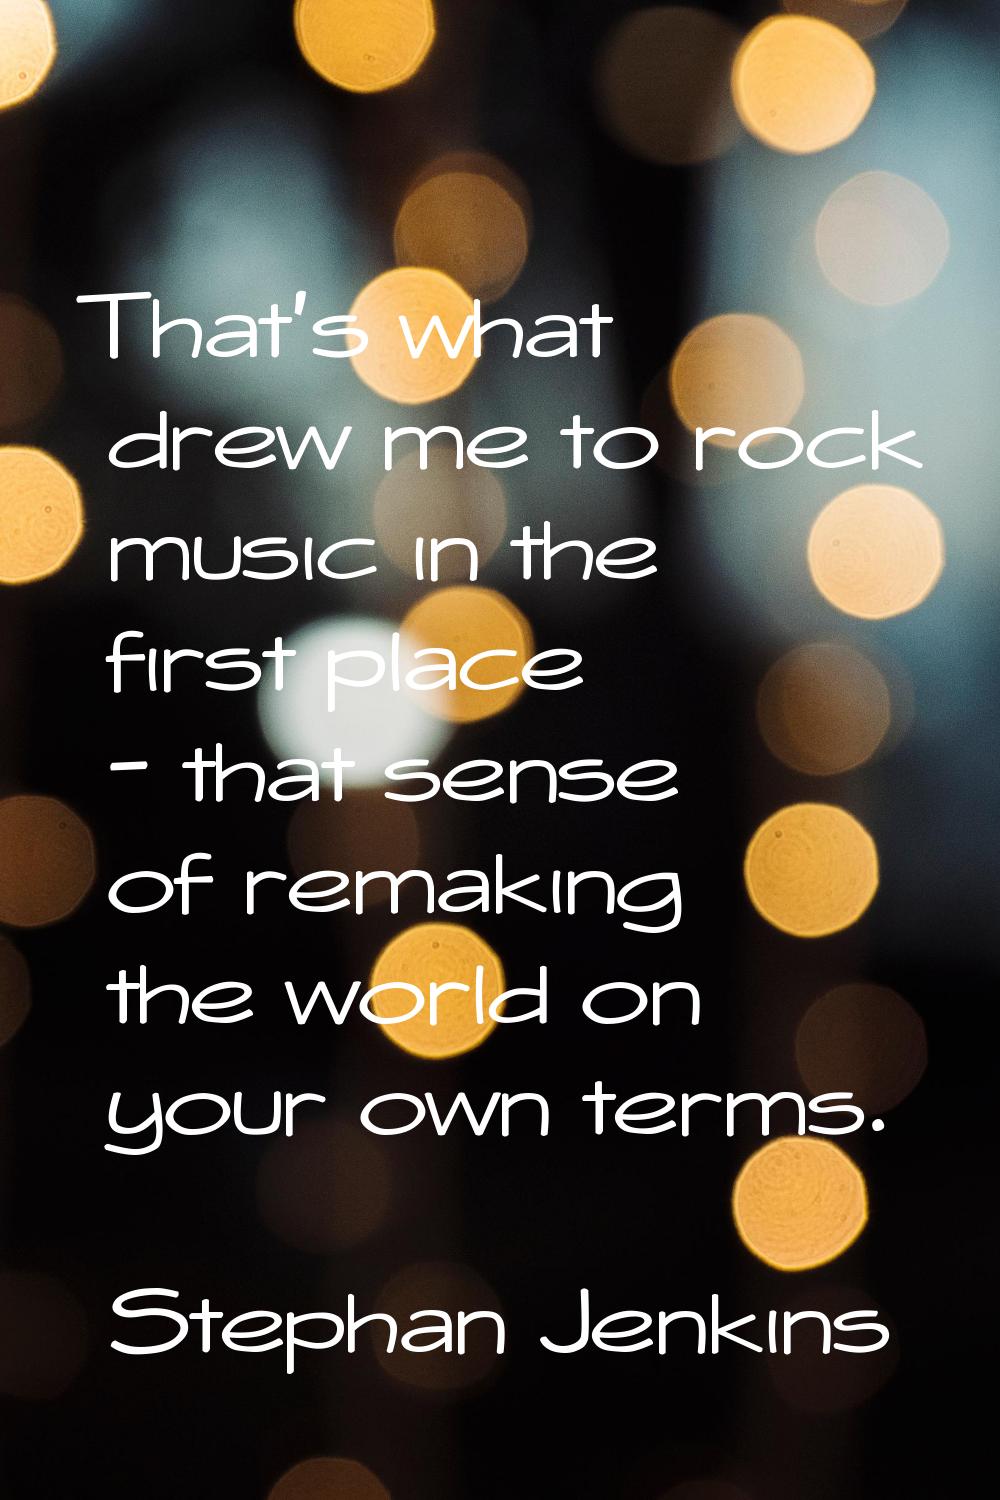 That's what drew me to rock music in the first place - that sense of remaking the world on your own